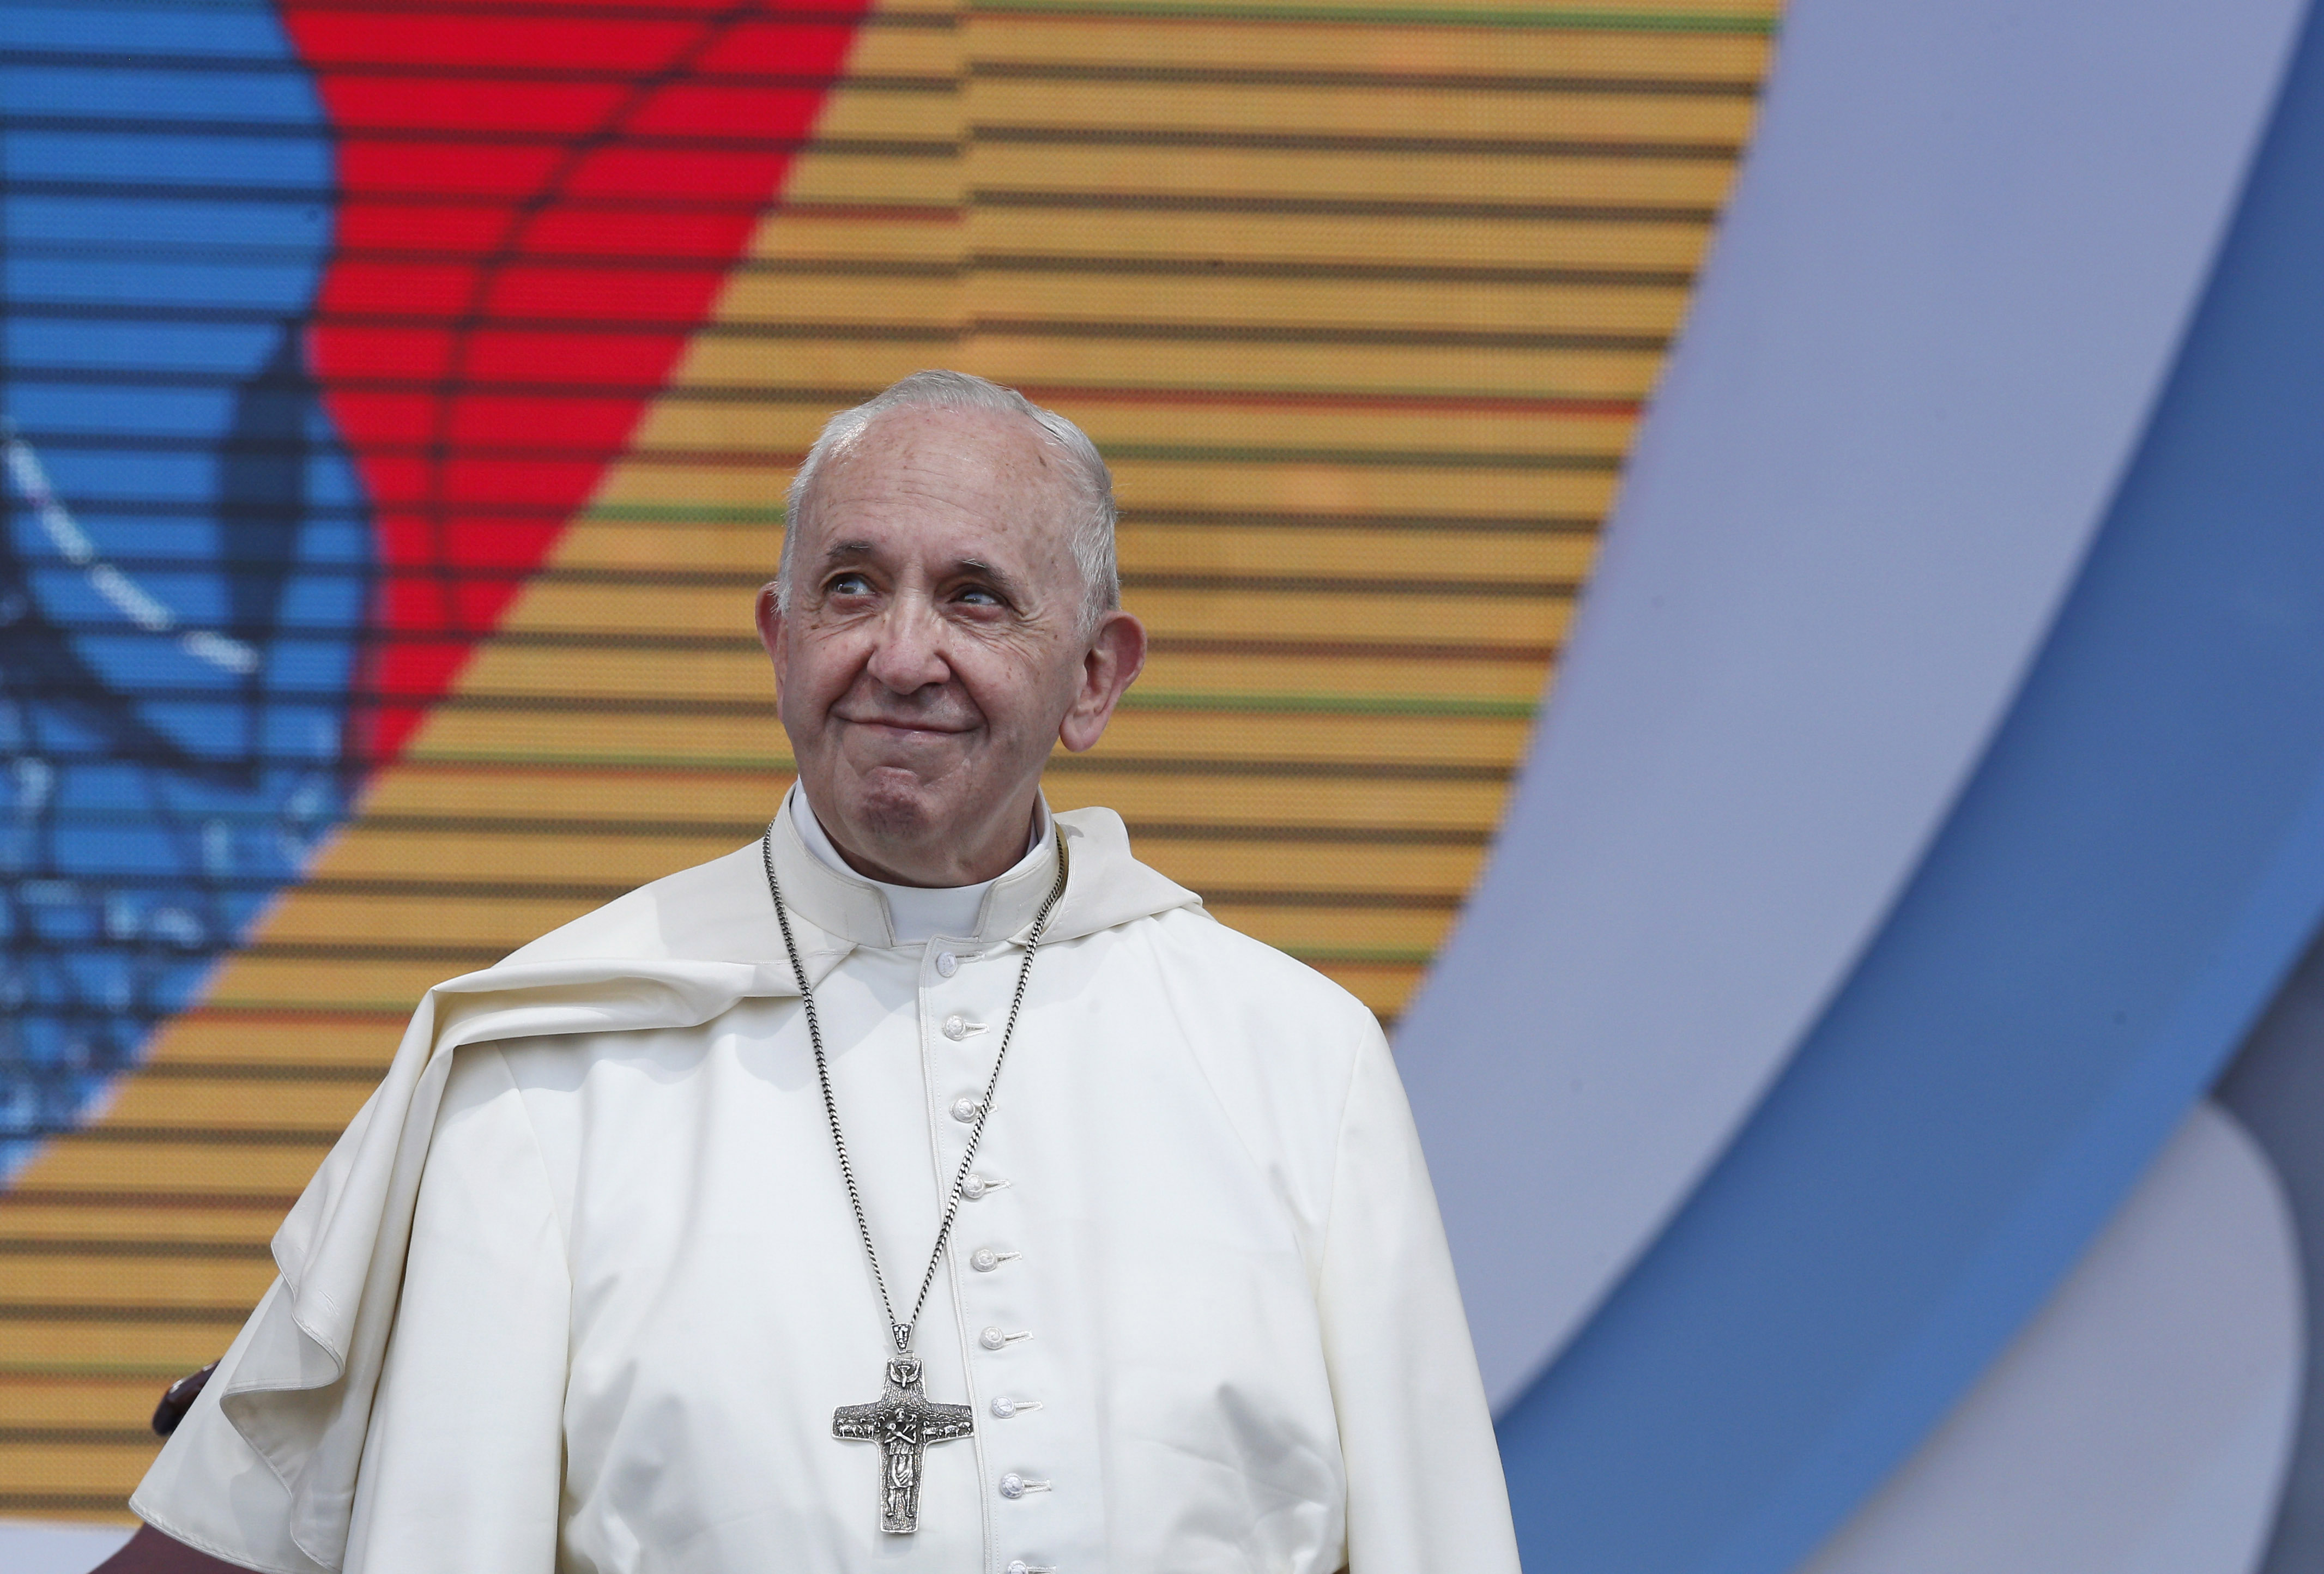 Keep God’s love alive, pope tells young people at World Youth Day The